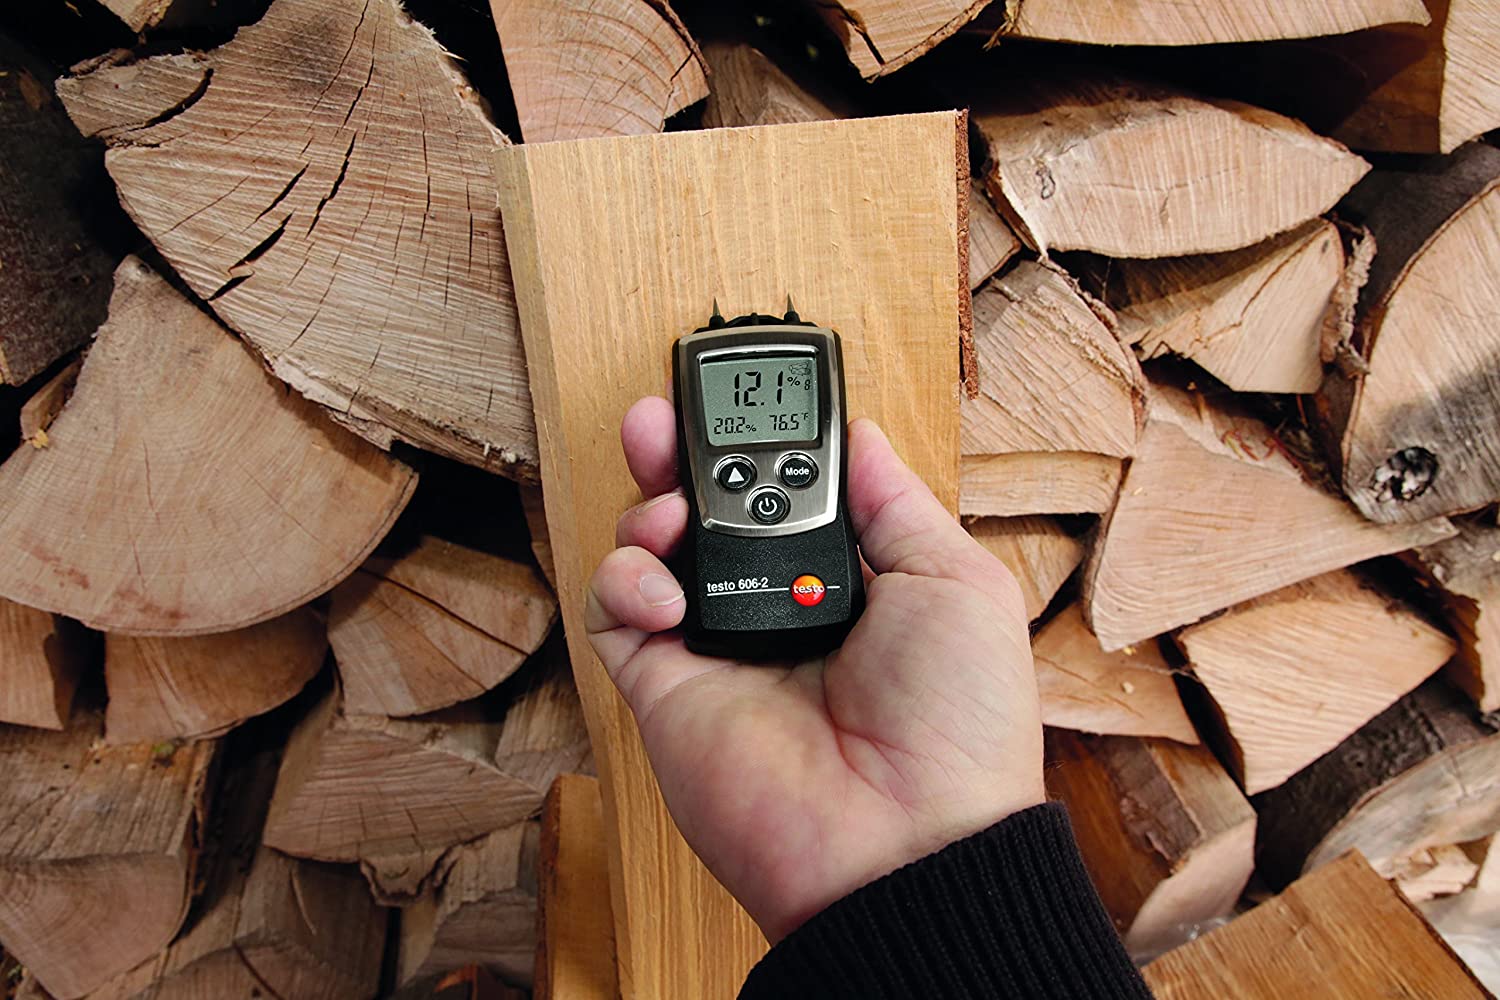 TESTO 606-2 - Moisture meter for material moisture and relative humidity